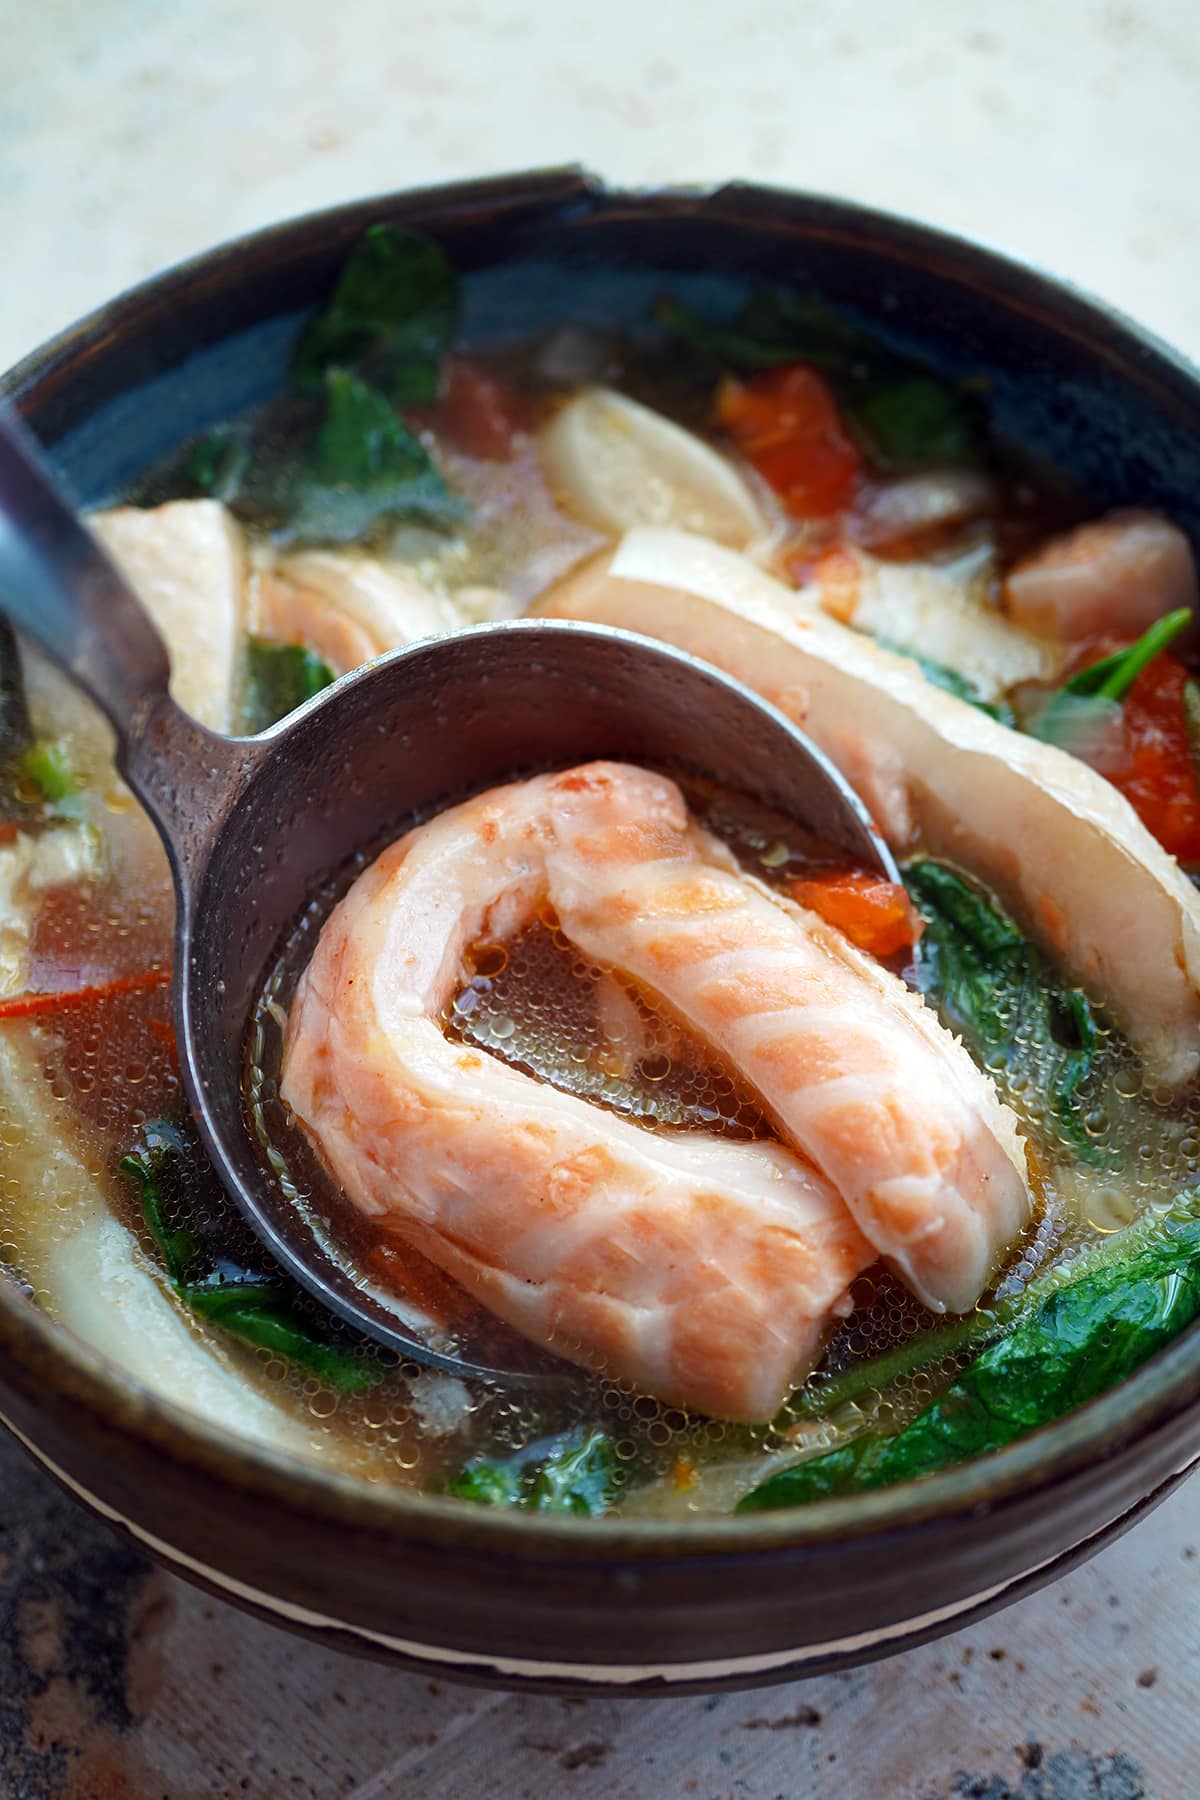 Salmon Belly na Sinigang